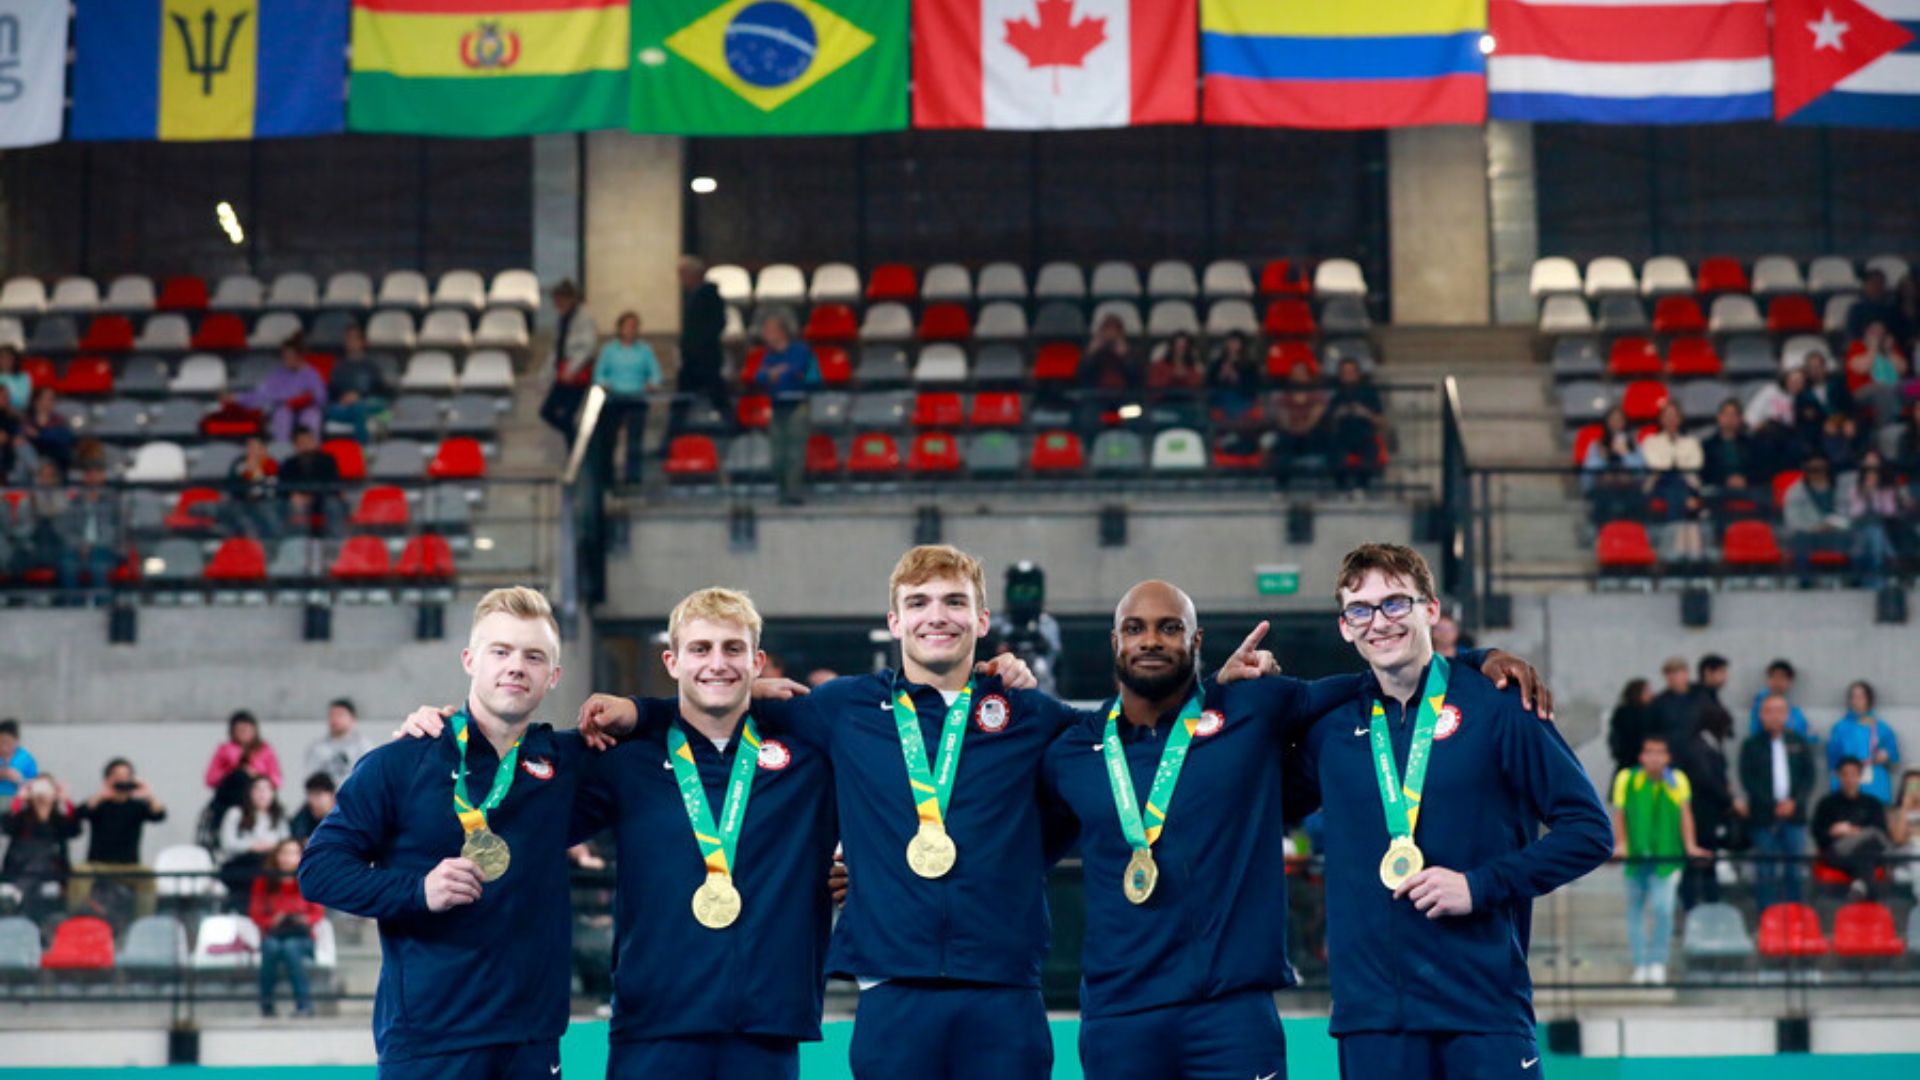 The United States solidifies its place on the podium, Brazil adds more medals